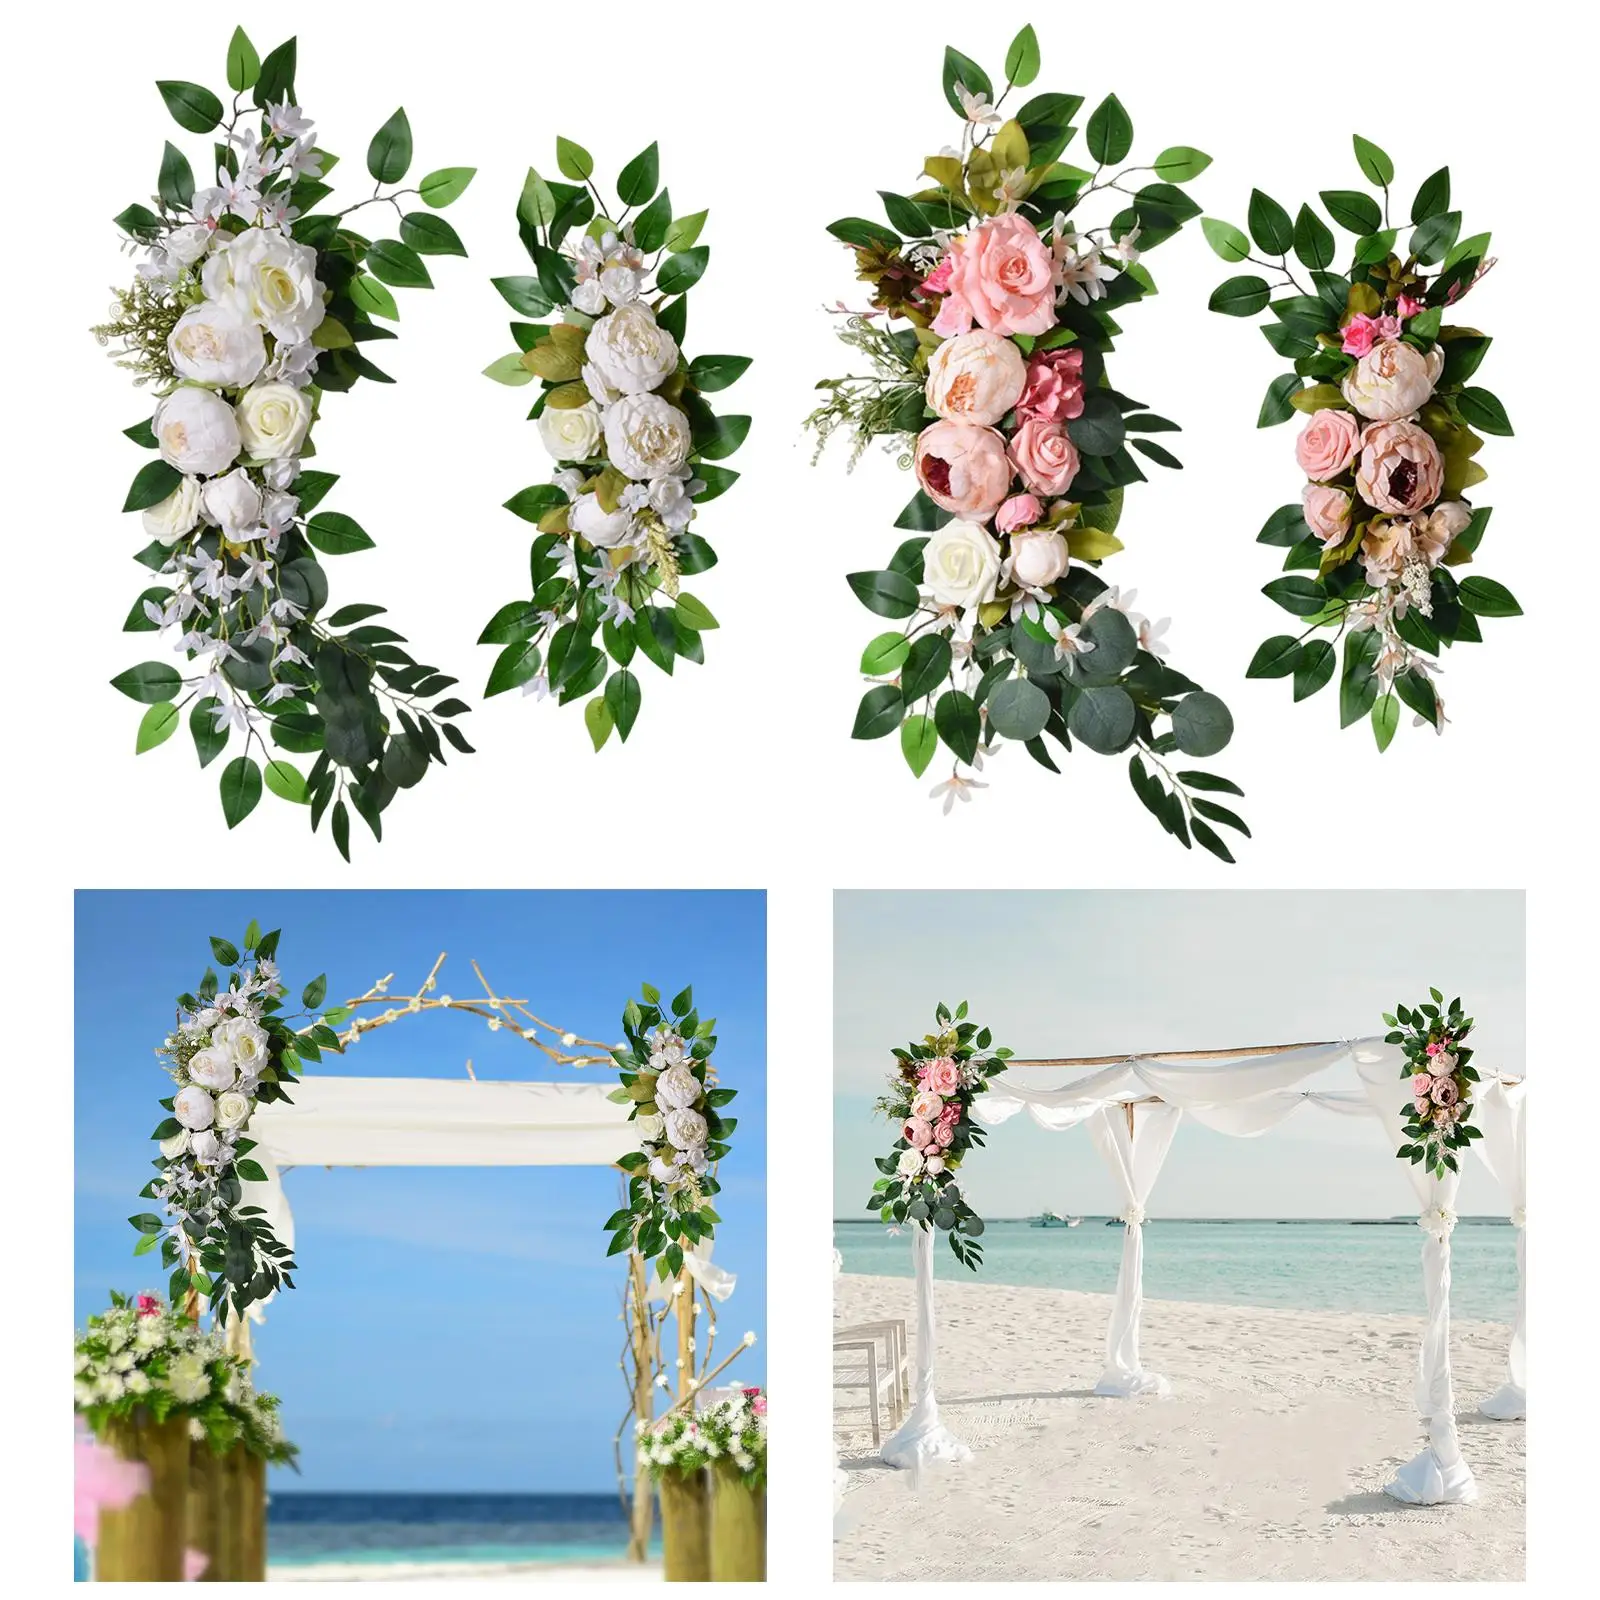 2Pcs Hanging Wedding Arch Flower Silk Flowers Rustic Artificial Floral for Reception Wedding Party Window Backdrop Decoration